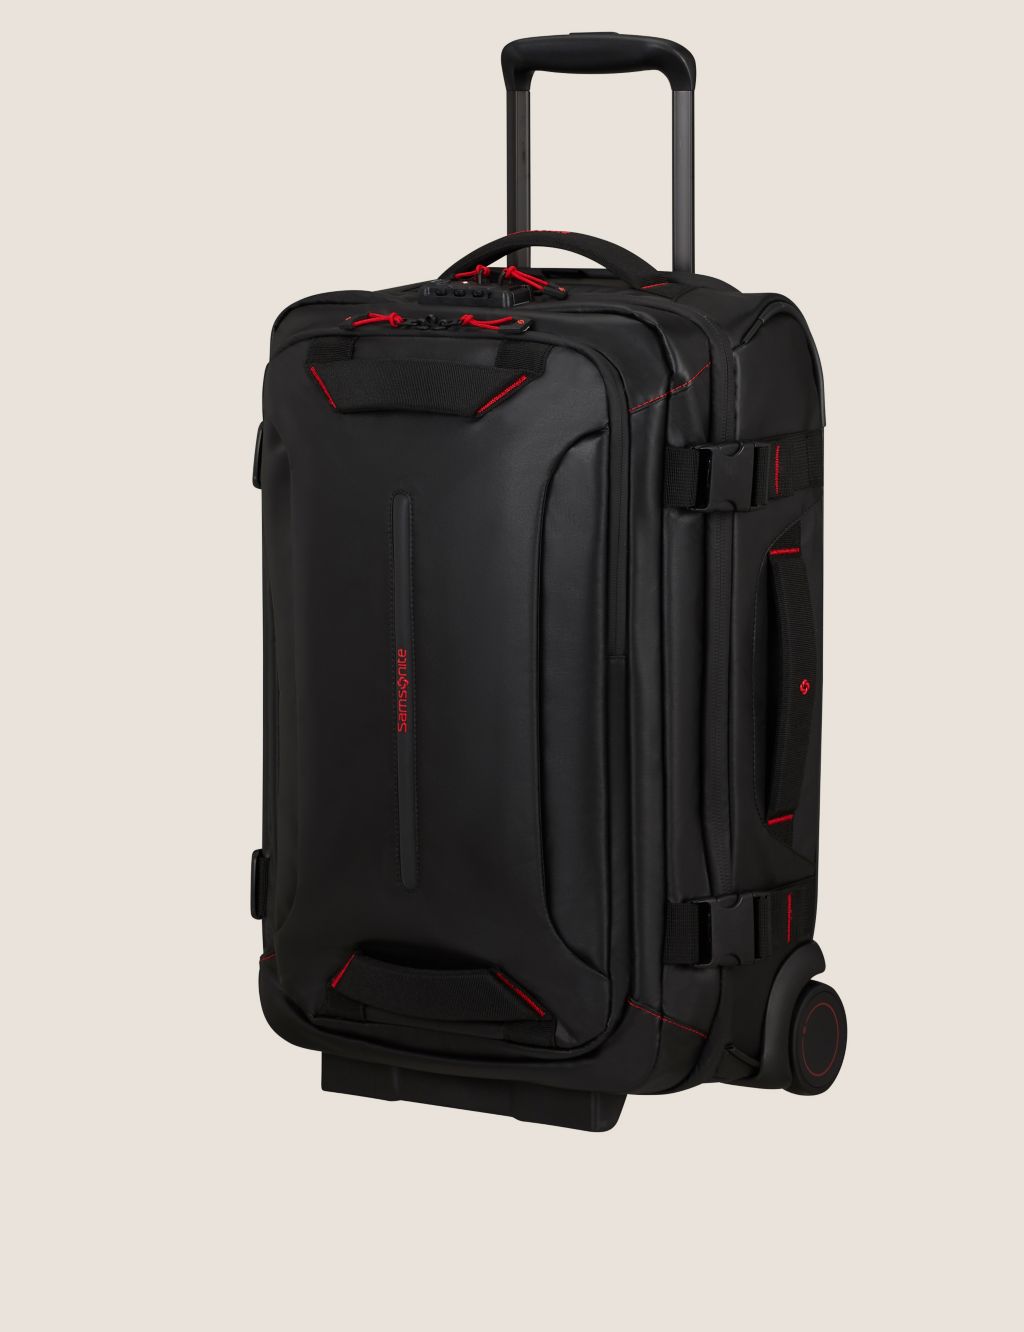 Ecodiver 2 Wheel Double Frame Cabin Suitcase image 1